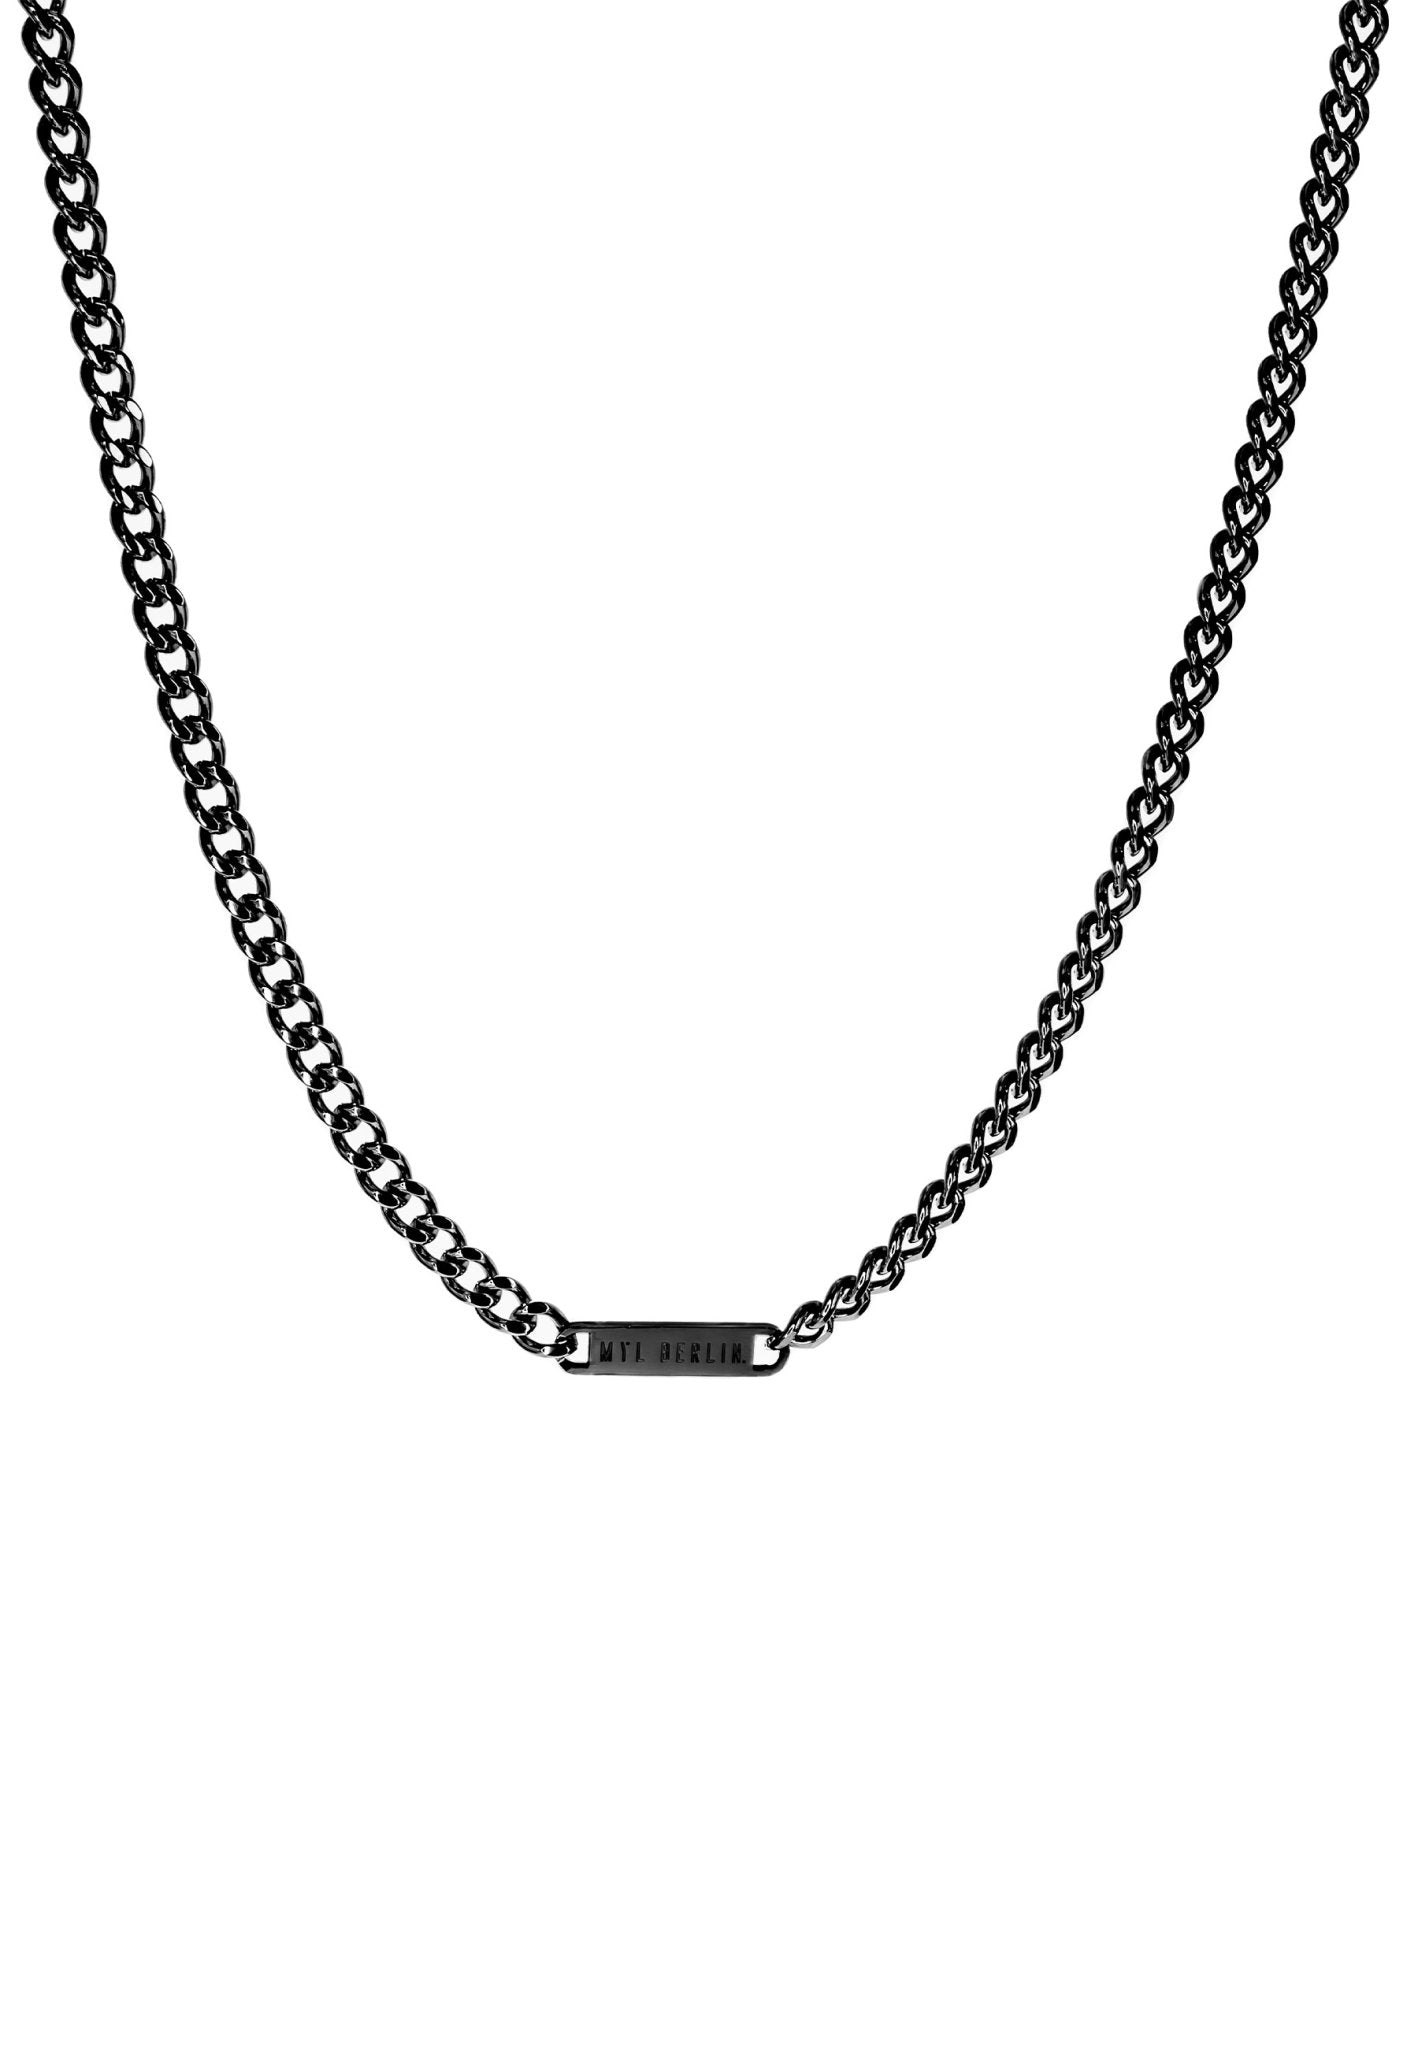 Thick Curb Chain Necklace "Berlin" - MYL BERLIN - 4260654113280 - 4260654113280